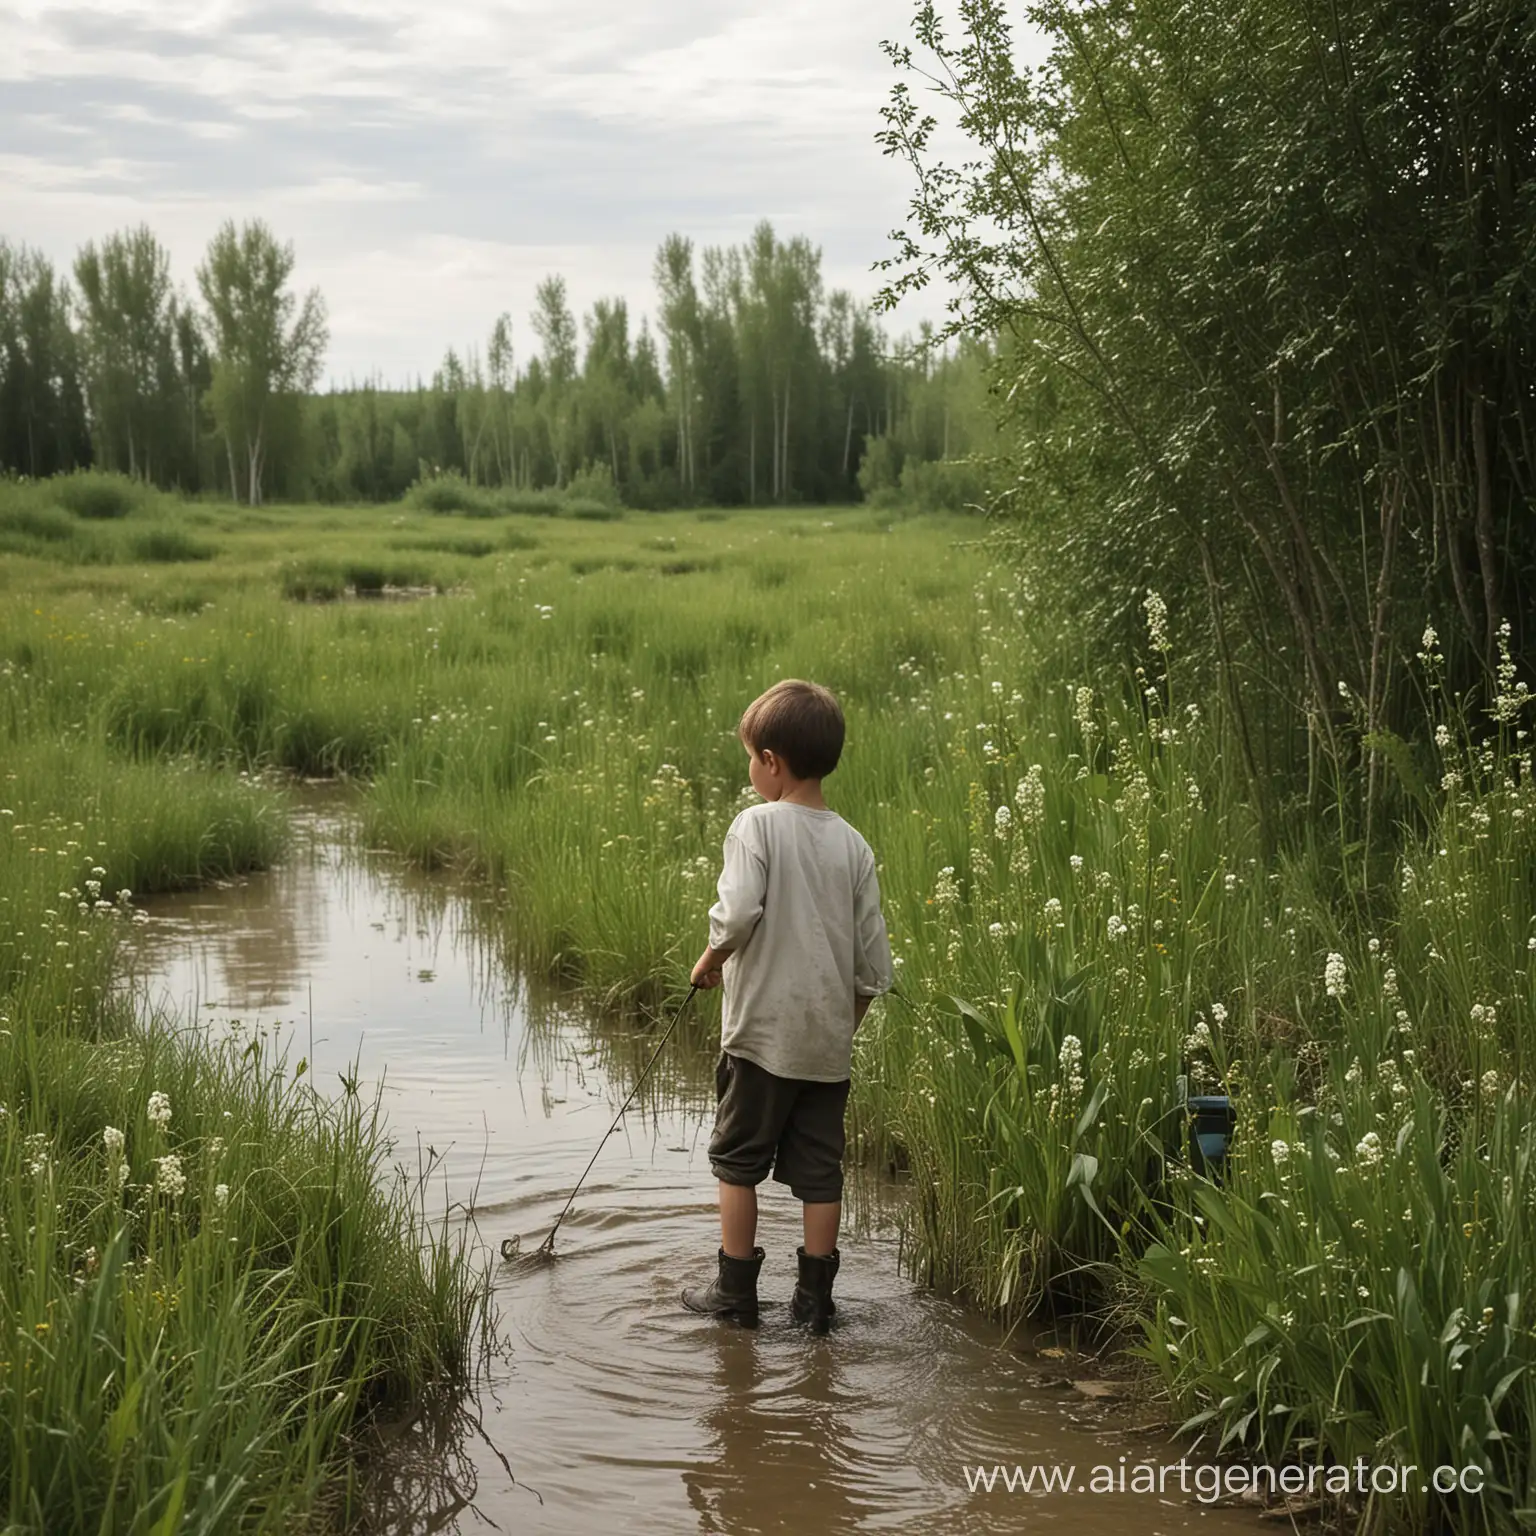 Nostalgic-Memories-of-Childhood-by-the-Small-Pond-Fishing-Wildflowers-and-Mothers-Love